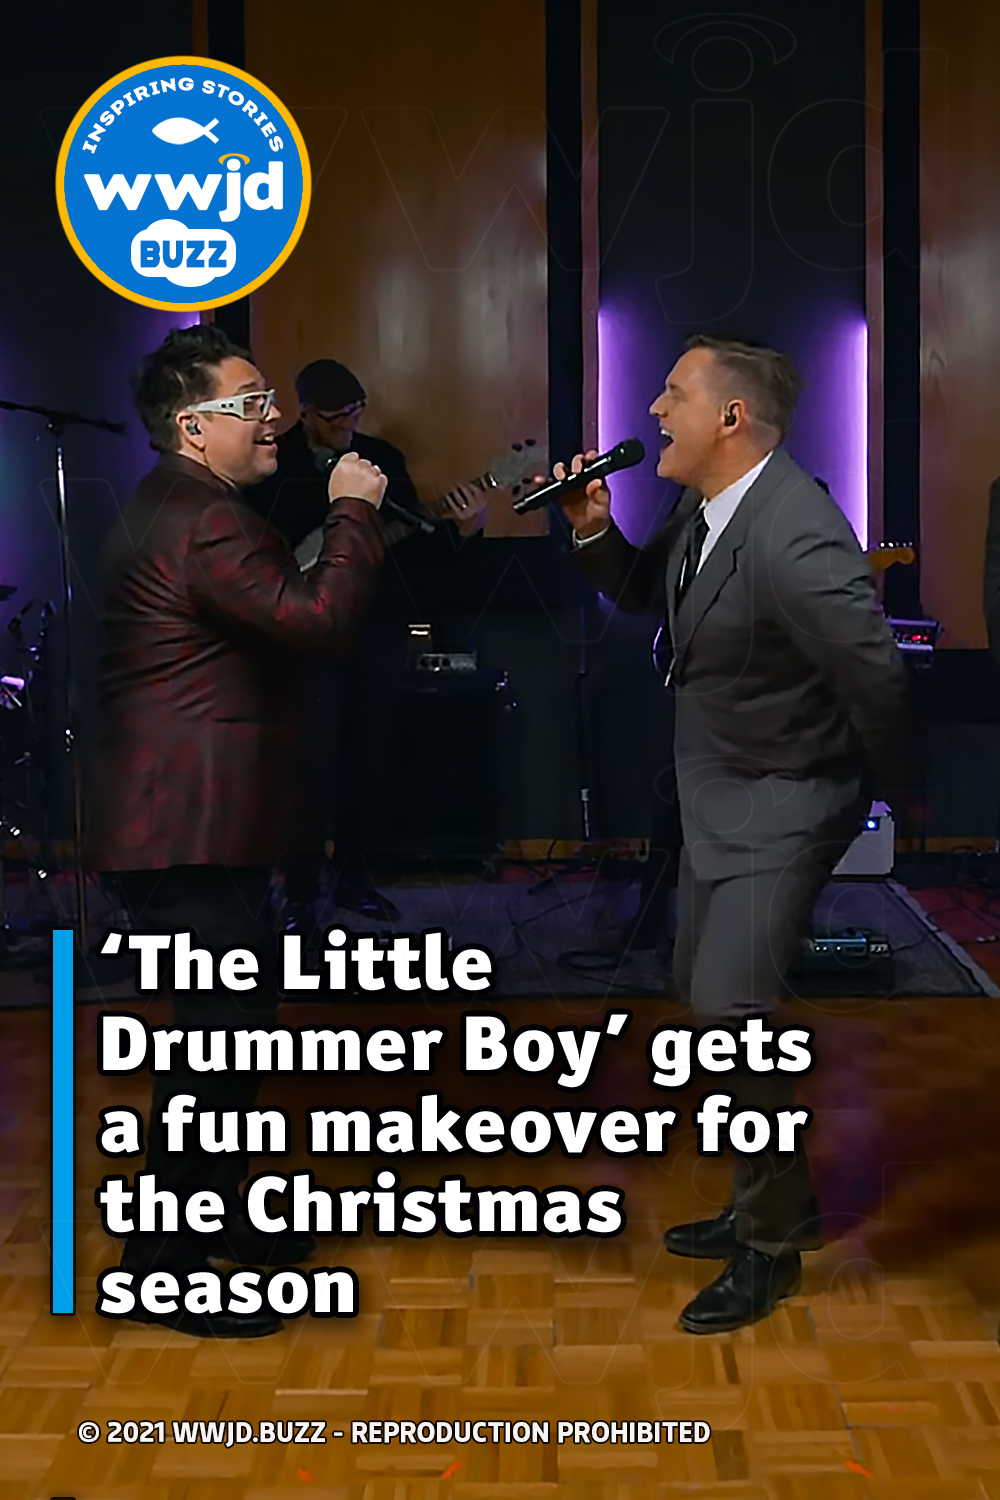 ‘The Little Drummer Boy’ gets a fun makeover for the Christmas season